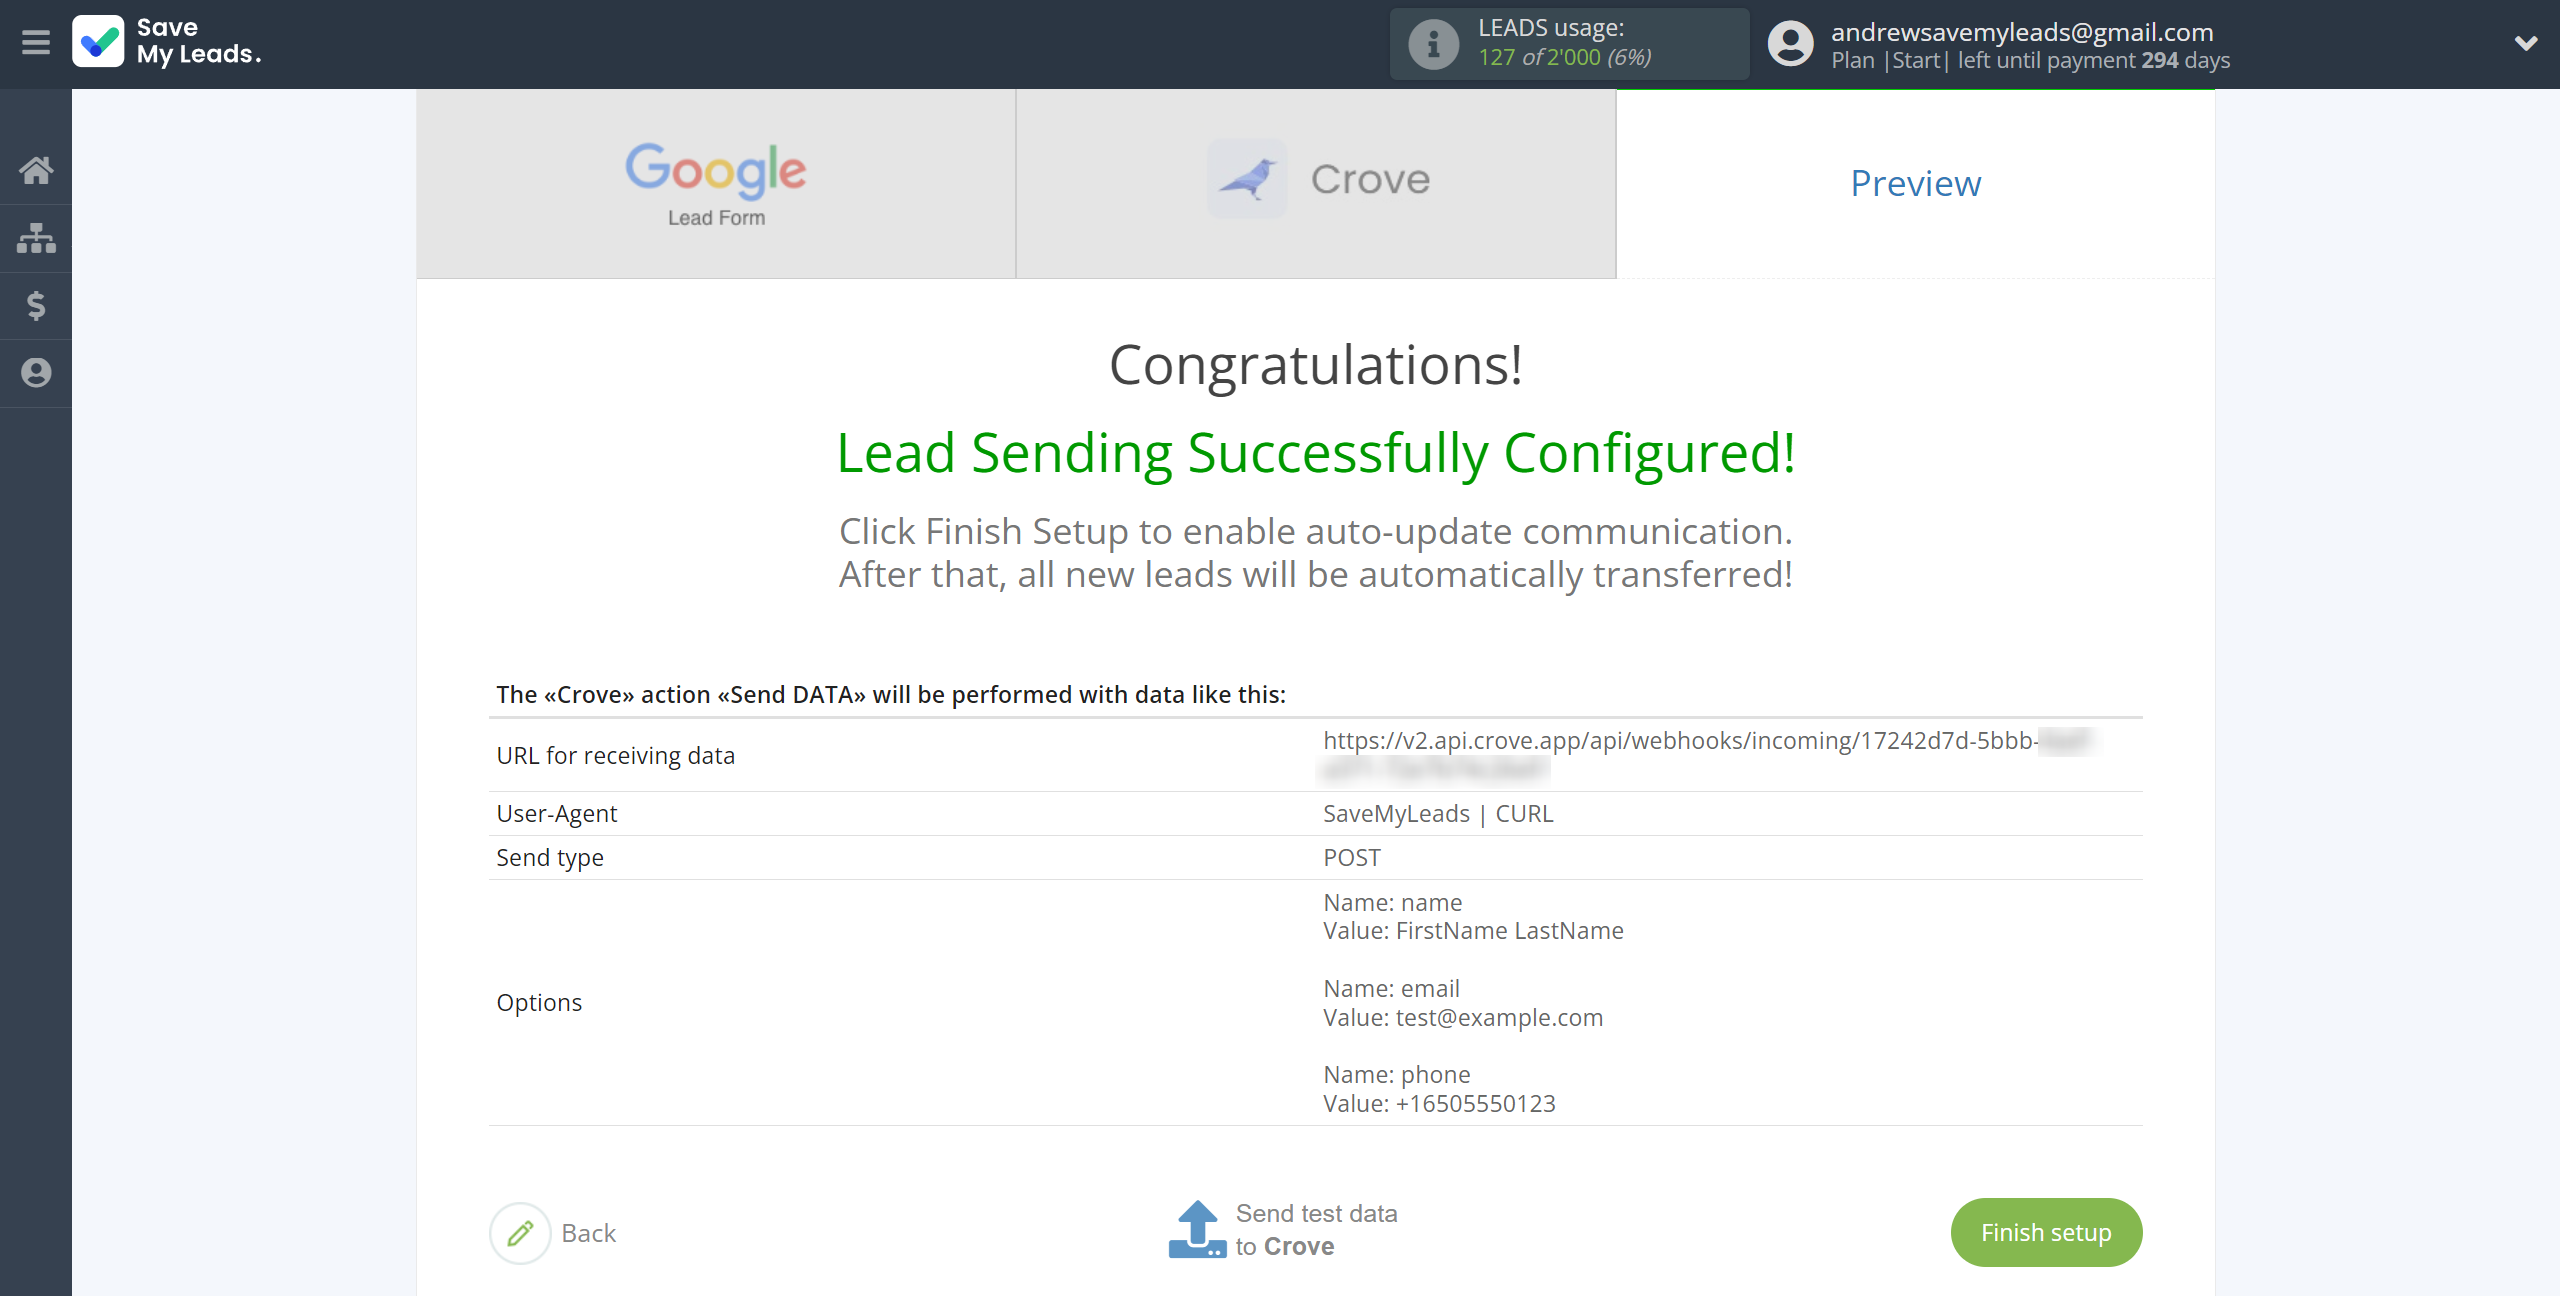 How to Connect Google Lead Form with Crove | Test data